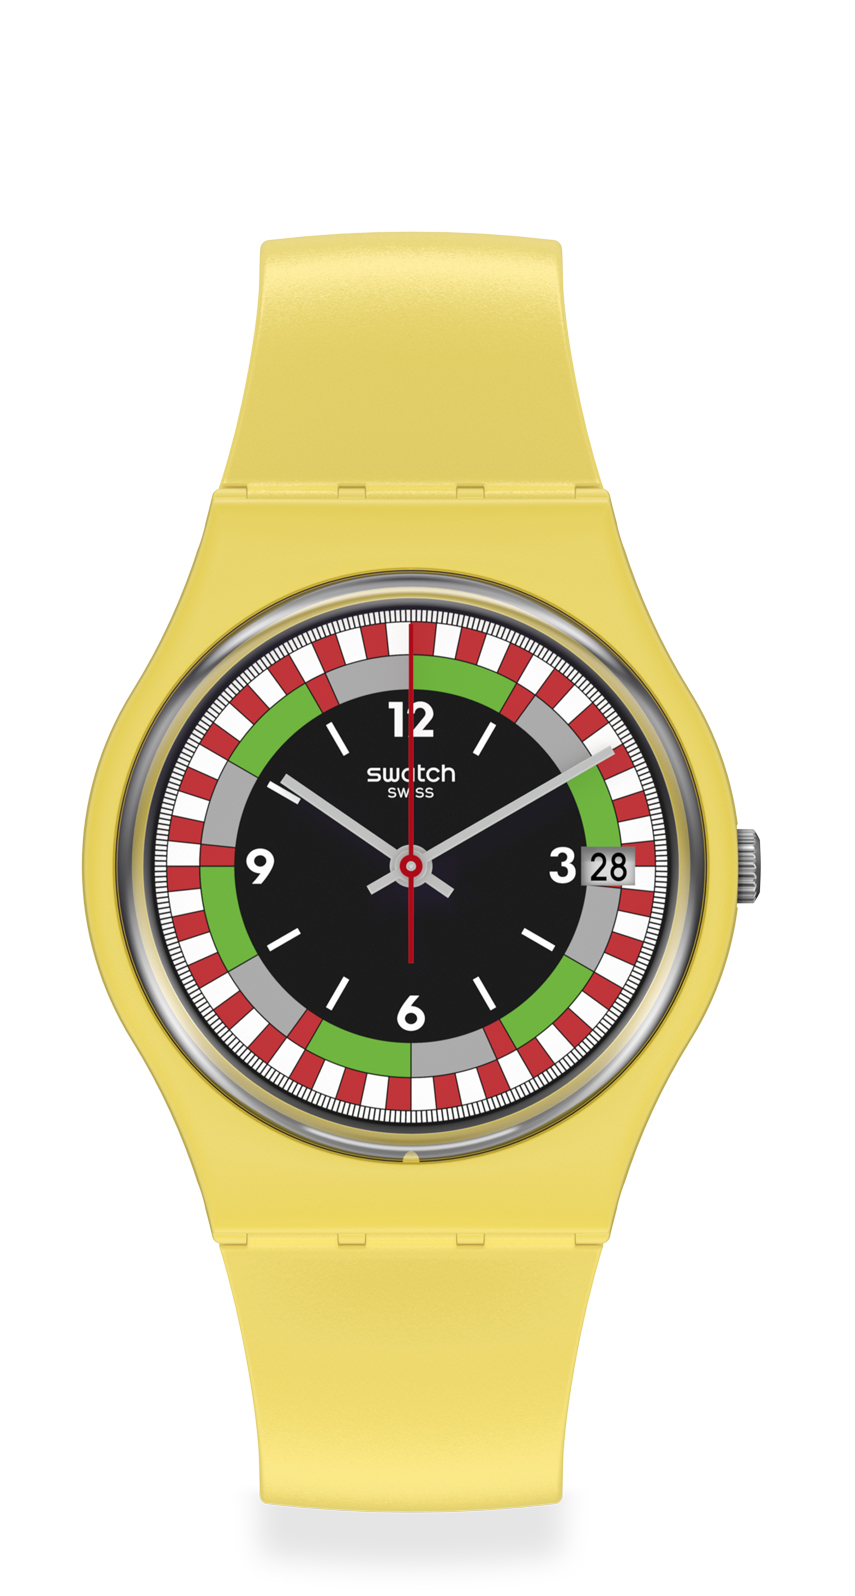 Swatch 1984 Reloaded Yellow Racer